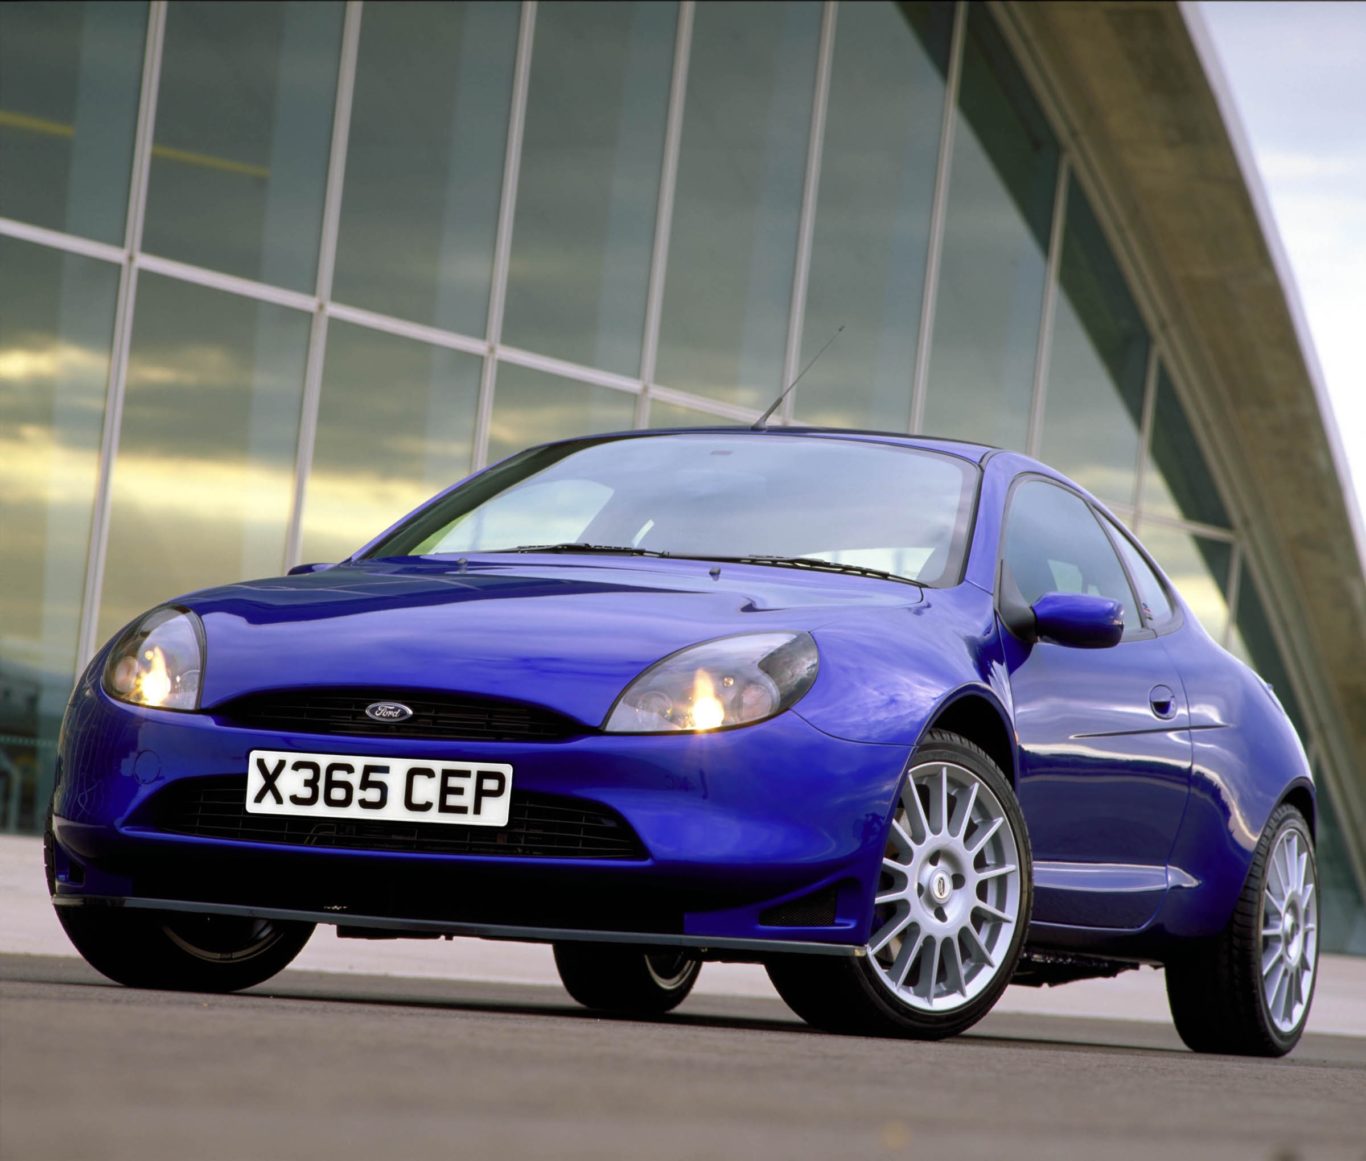 Ford's Racing Puma is an iconic offering from the Blue Oval